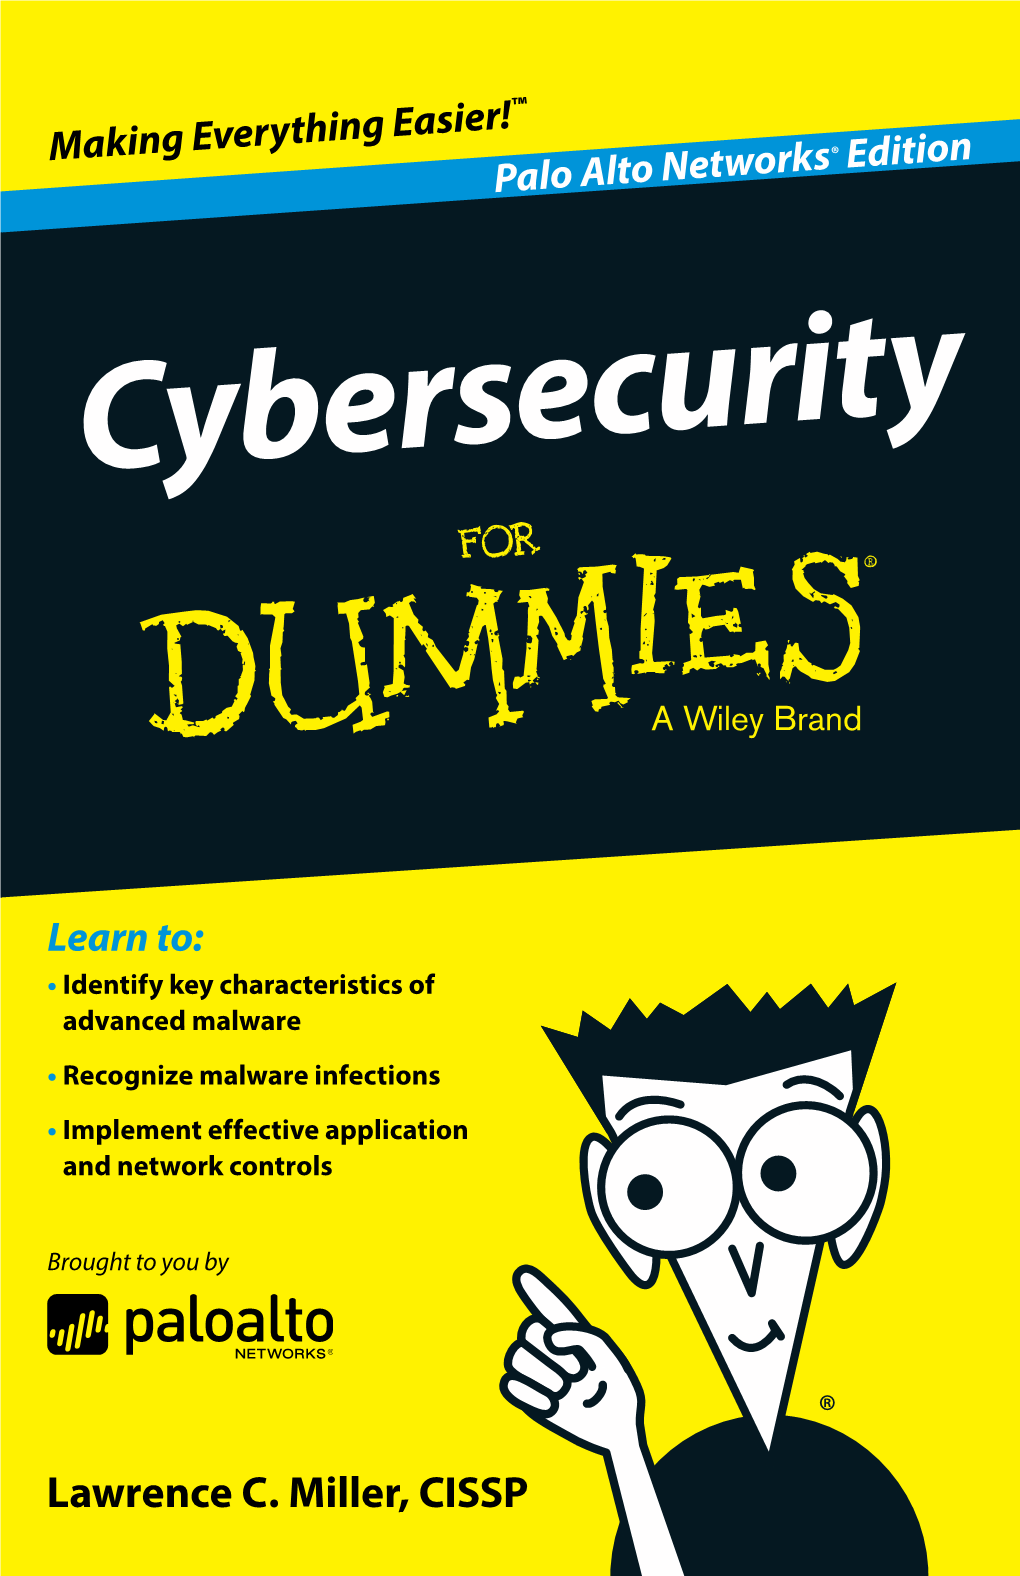 Cybersecurity for Dummies, Palo Alto Networks Edition